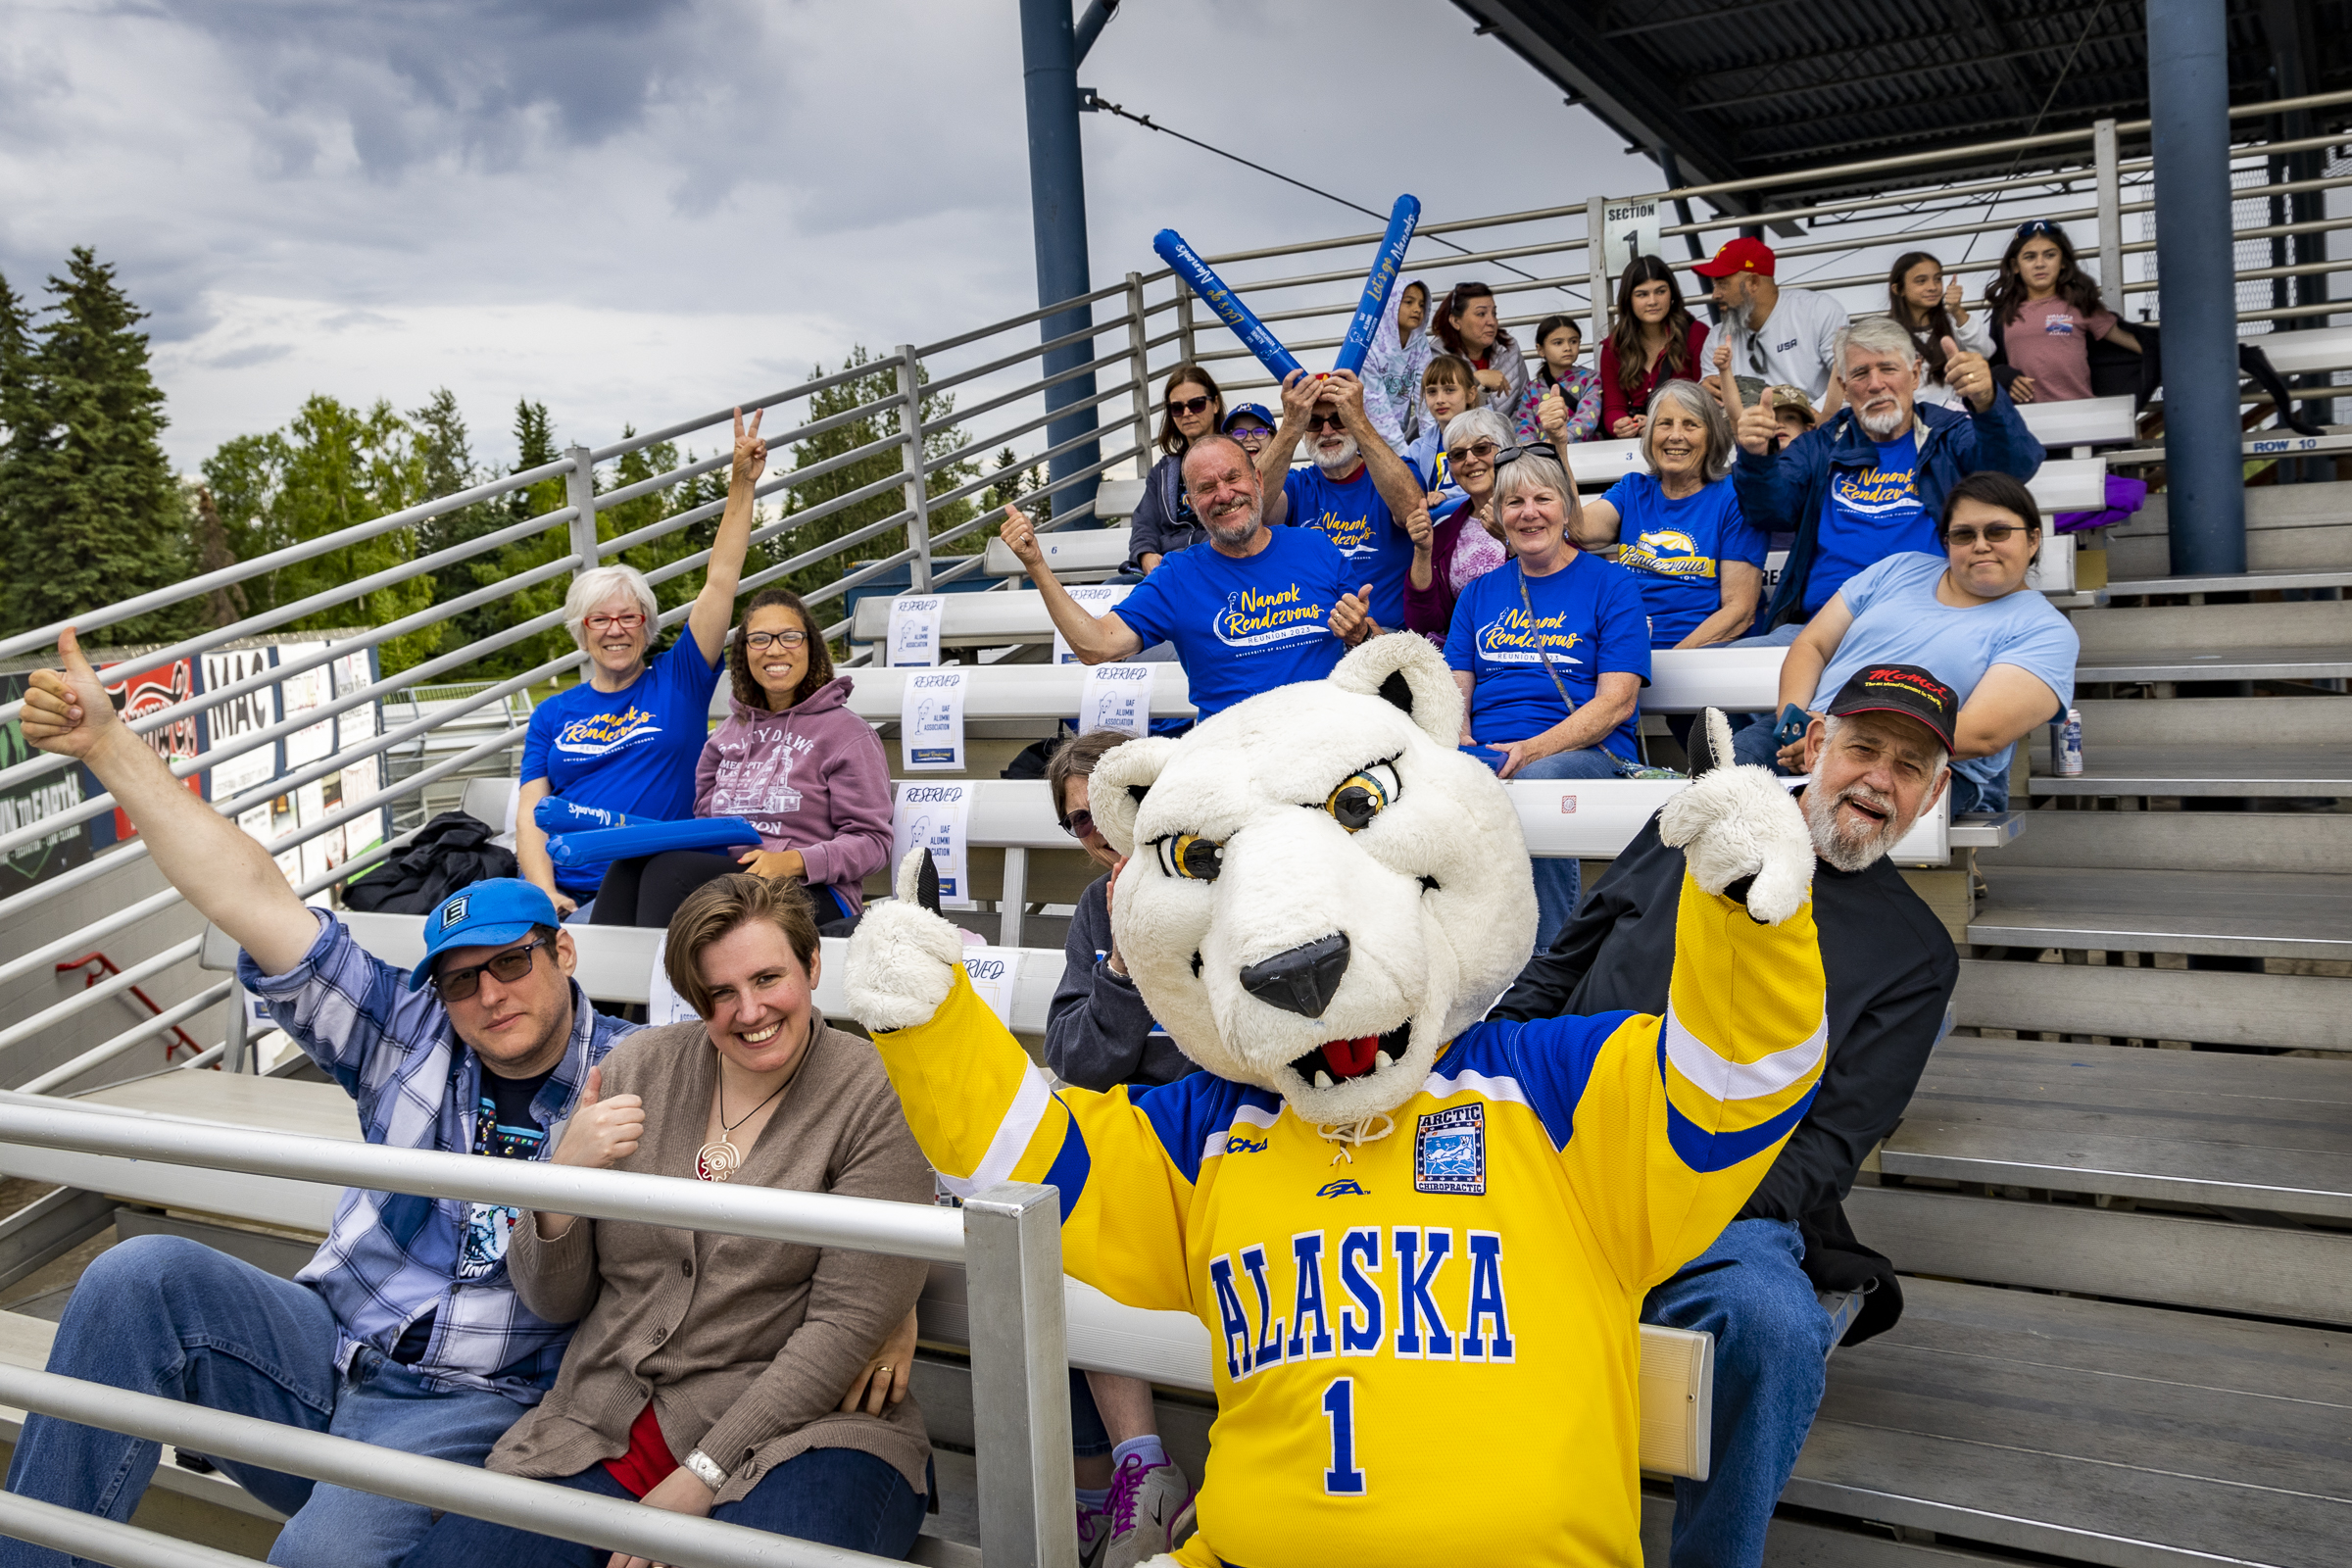 People cheer in the stands at a game with a polar bear mascot in costume.